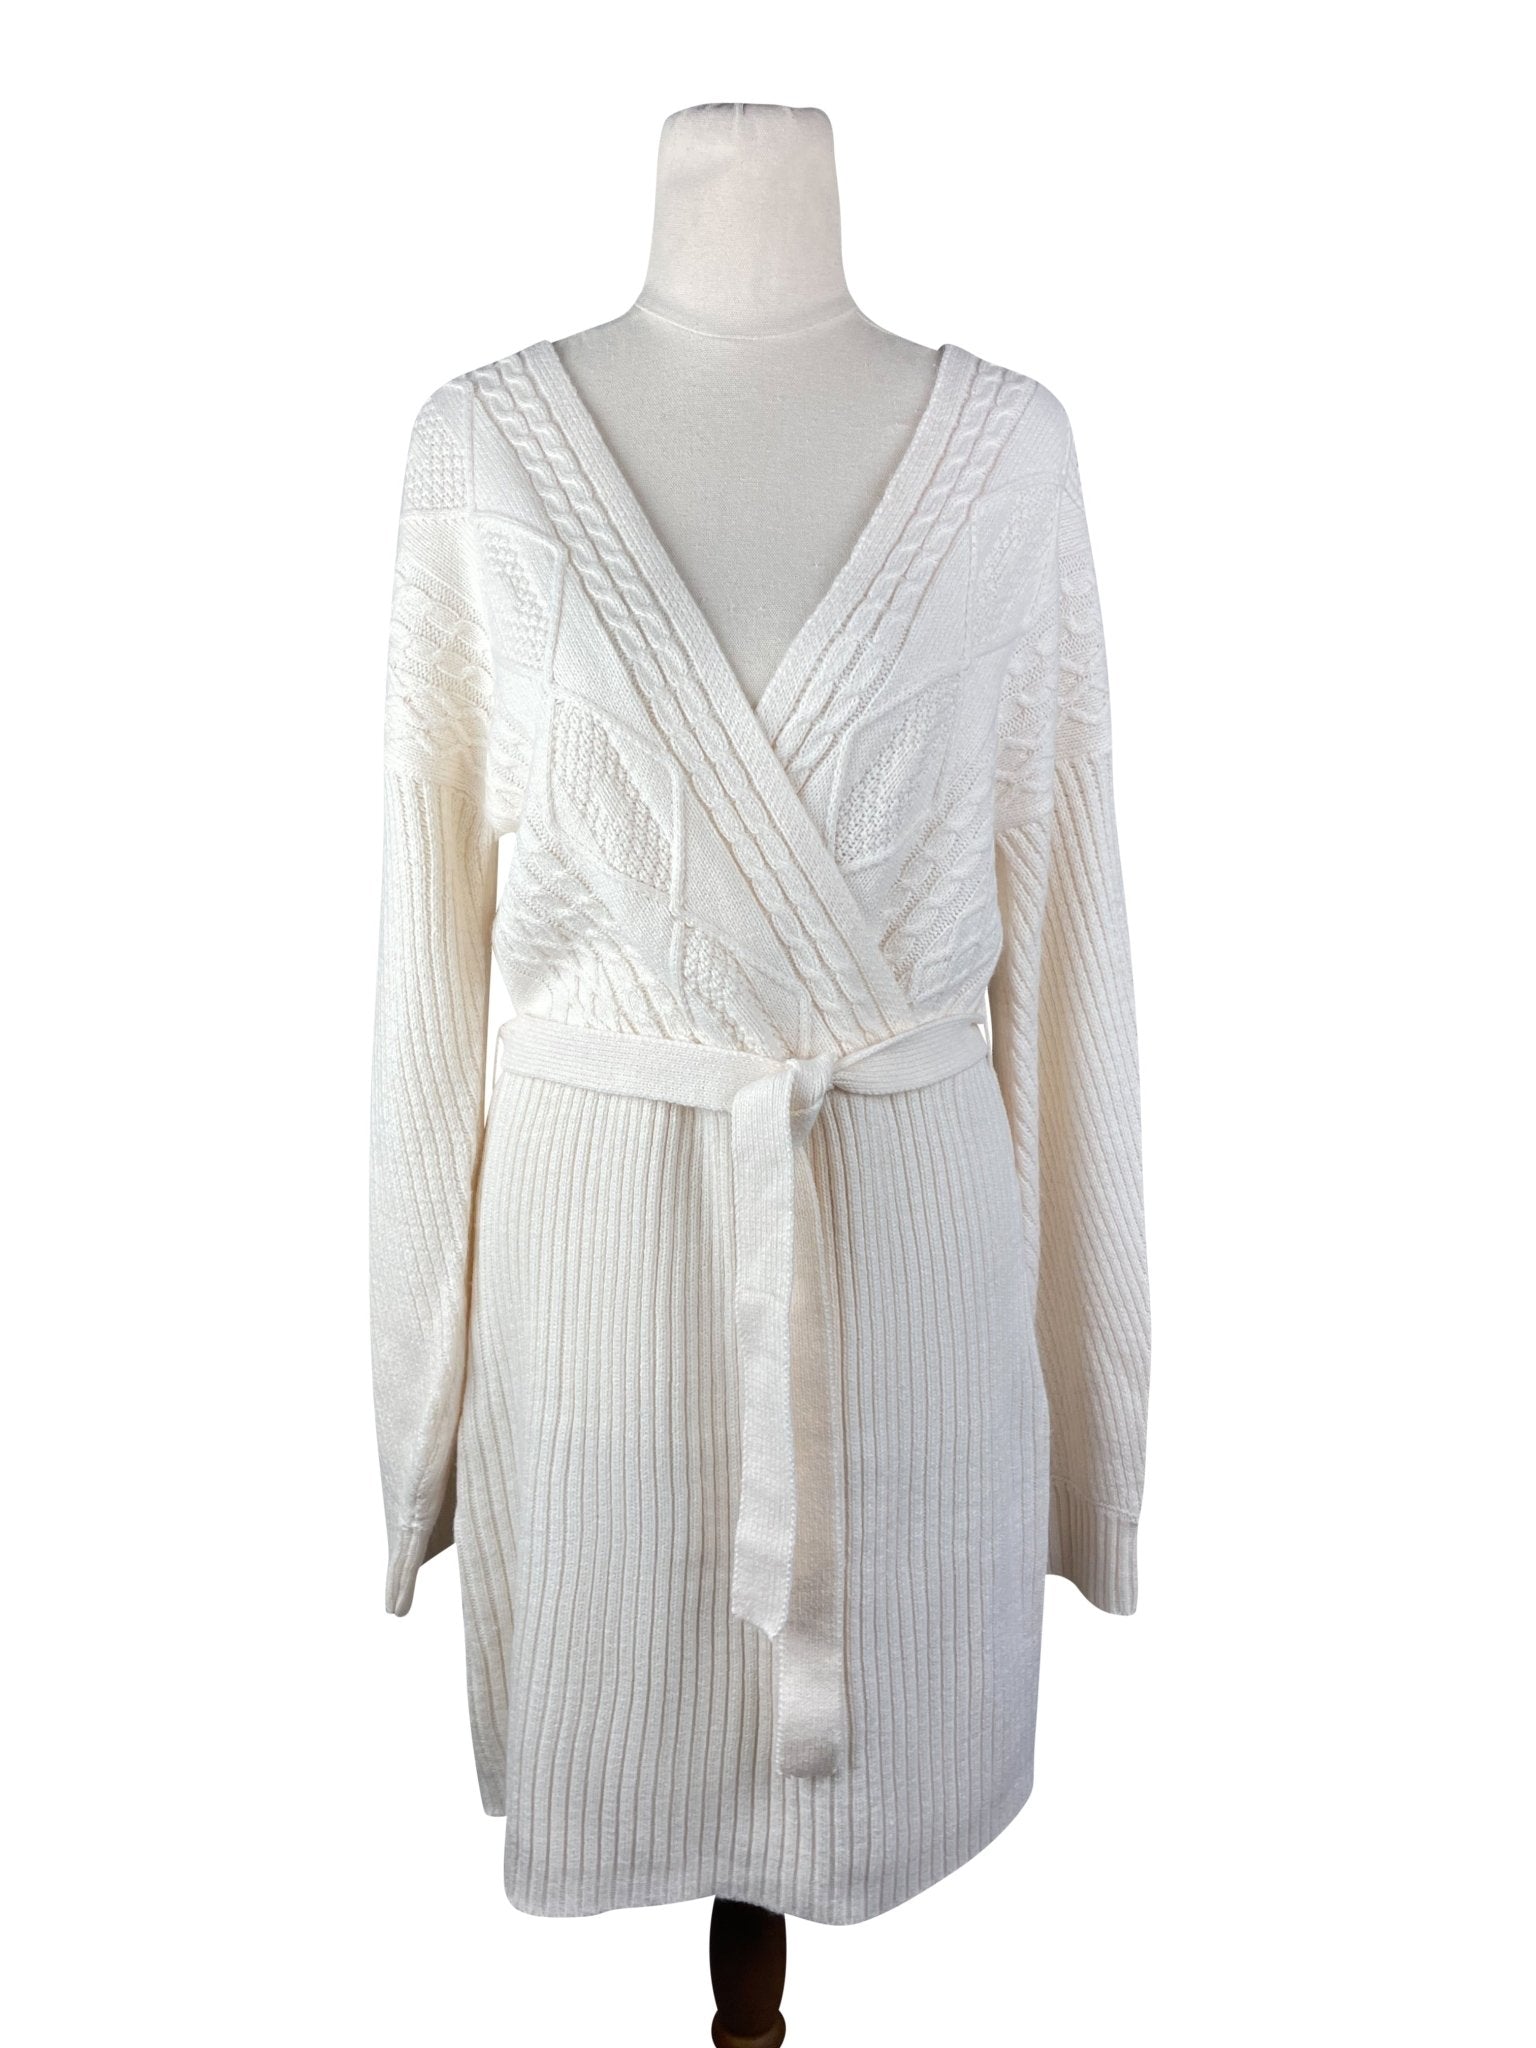 Forever 21 cream knit wrap dress | size 12-14